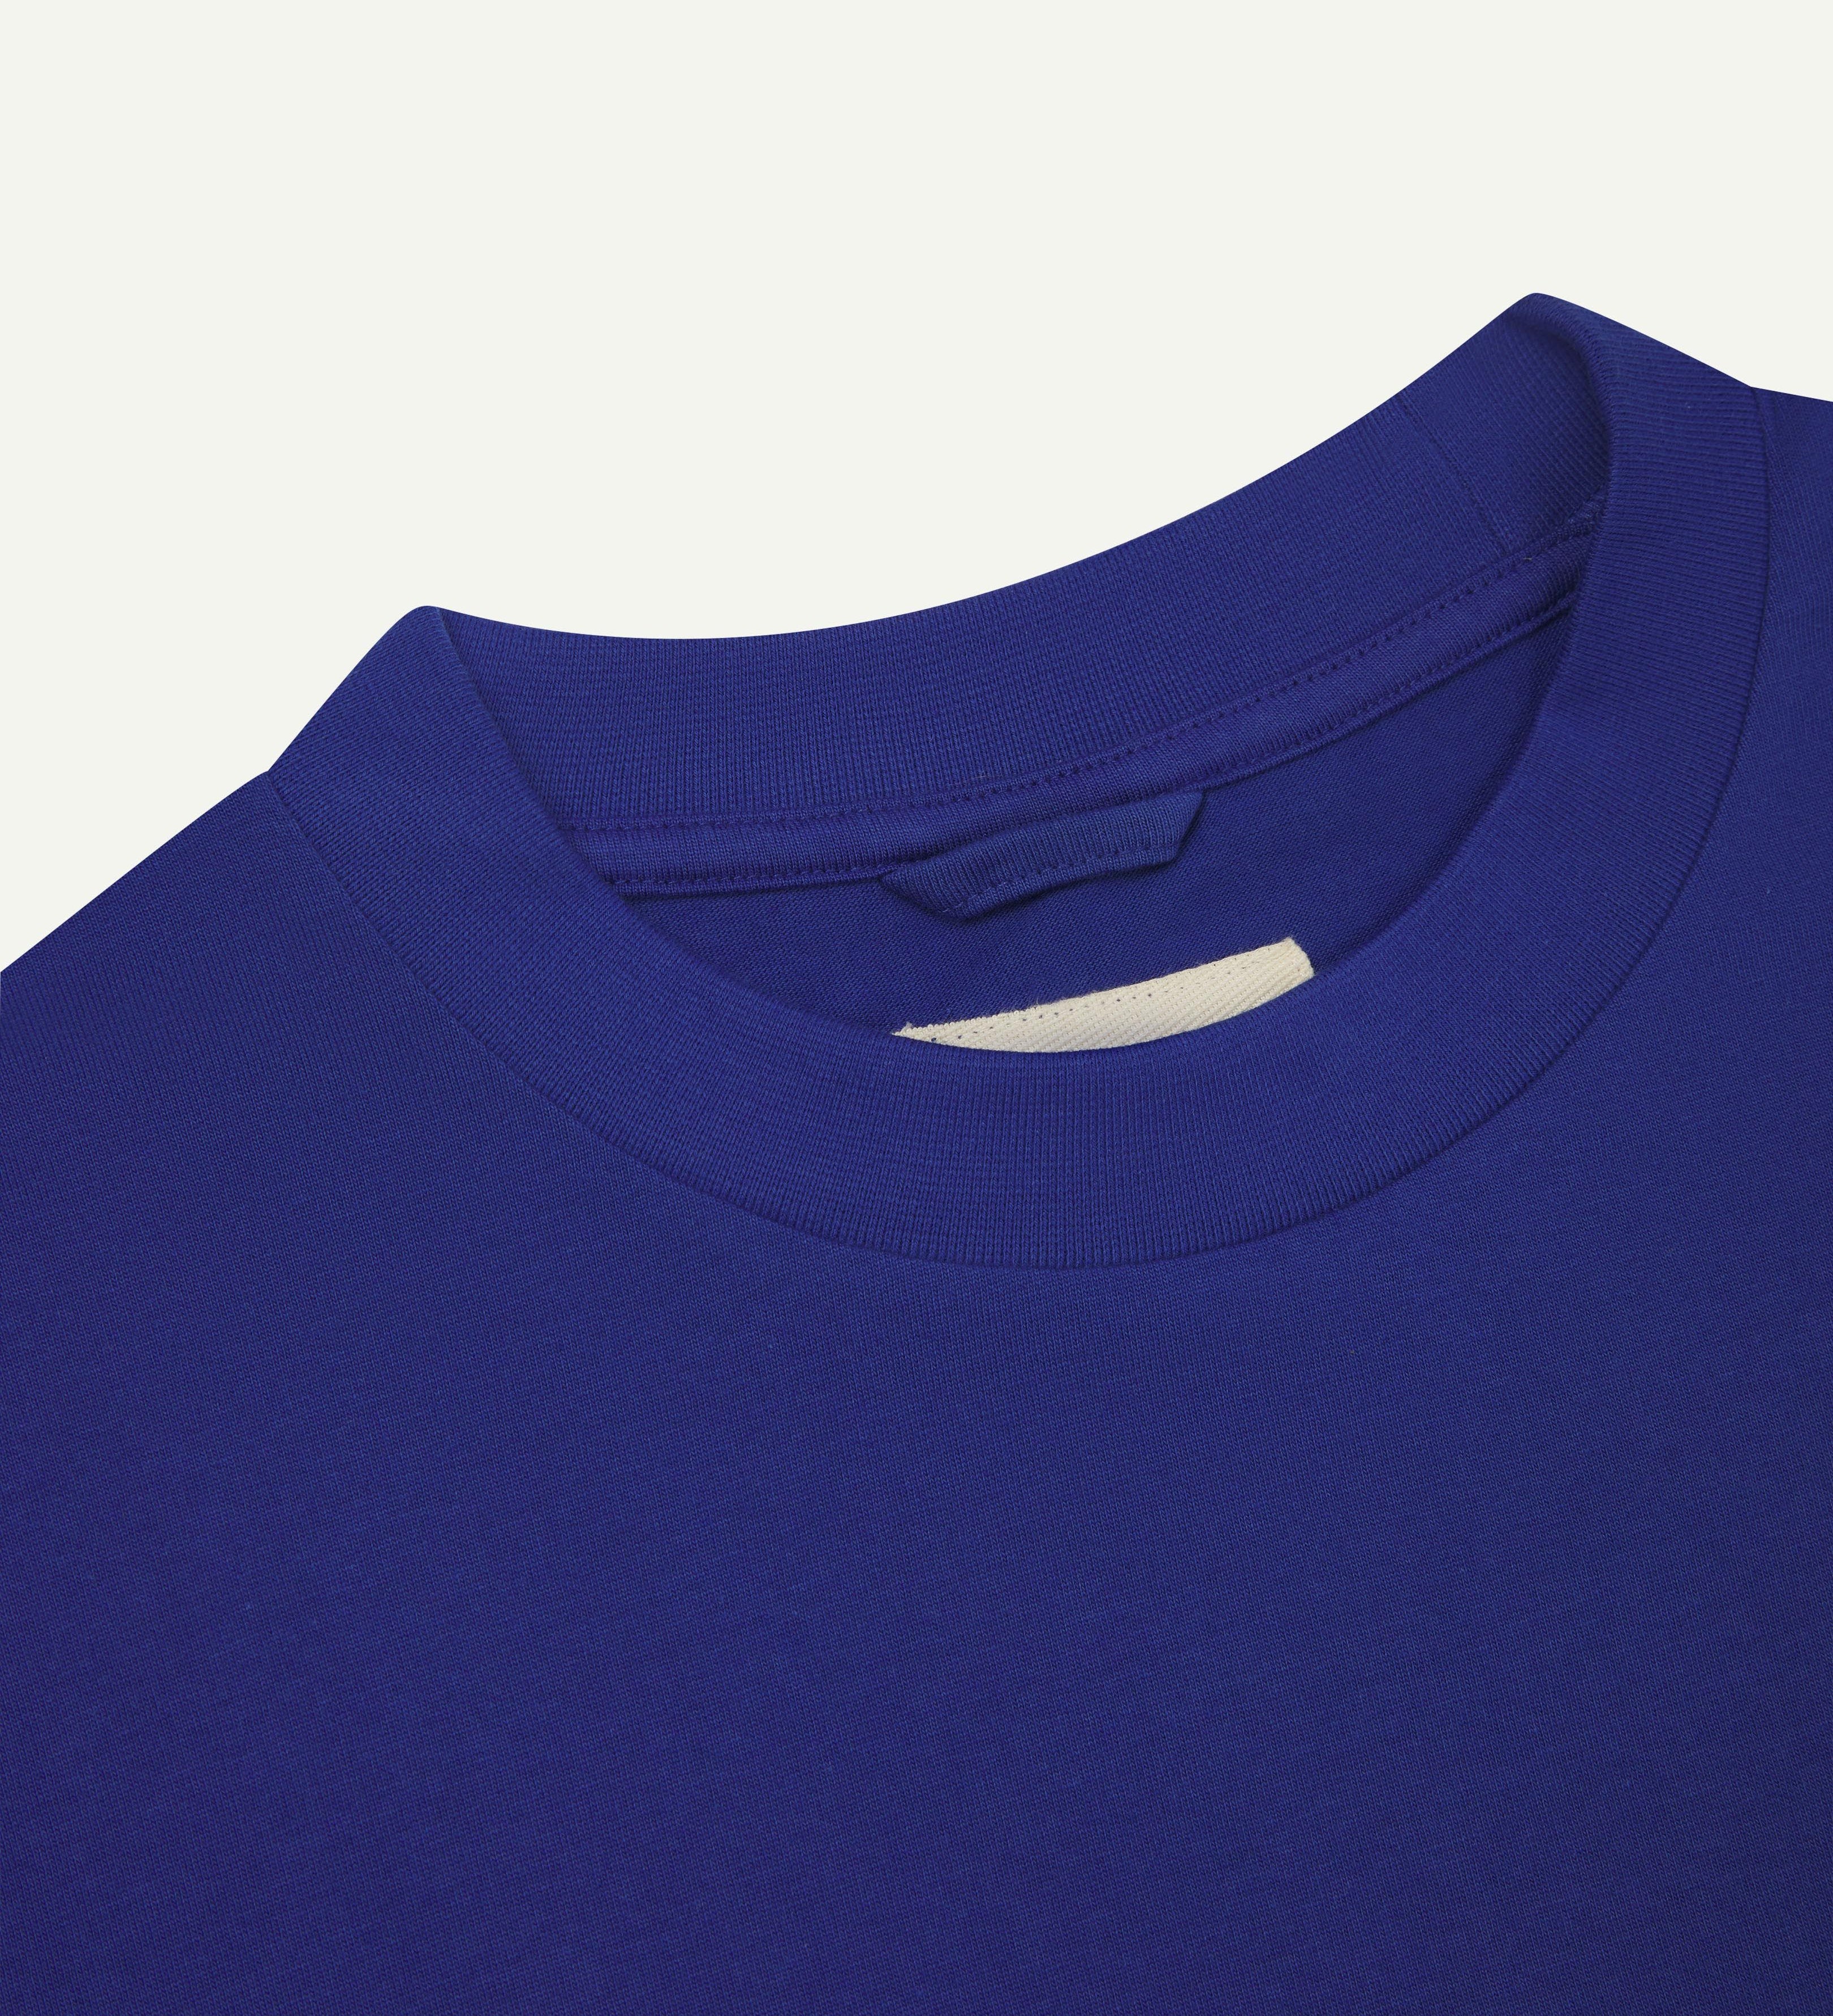 Front close view of  neck label  of ultra blue organic cotton #7008 oversized T-shirt by Uskees against white background.